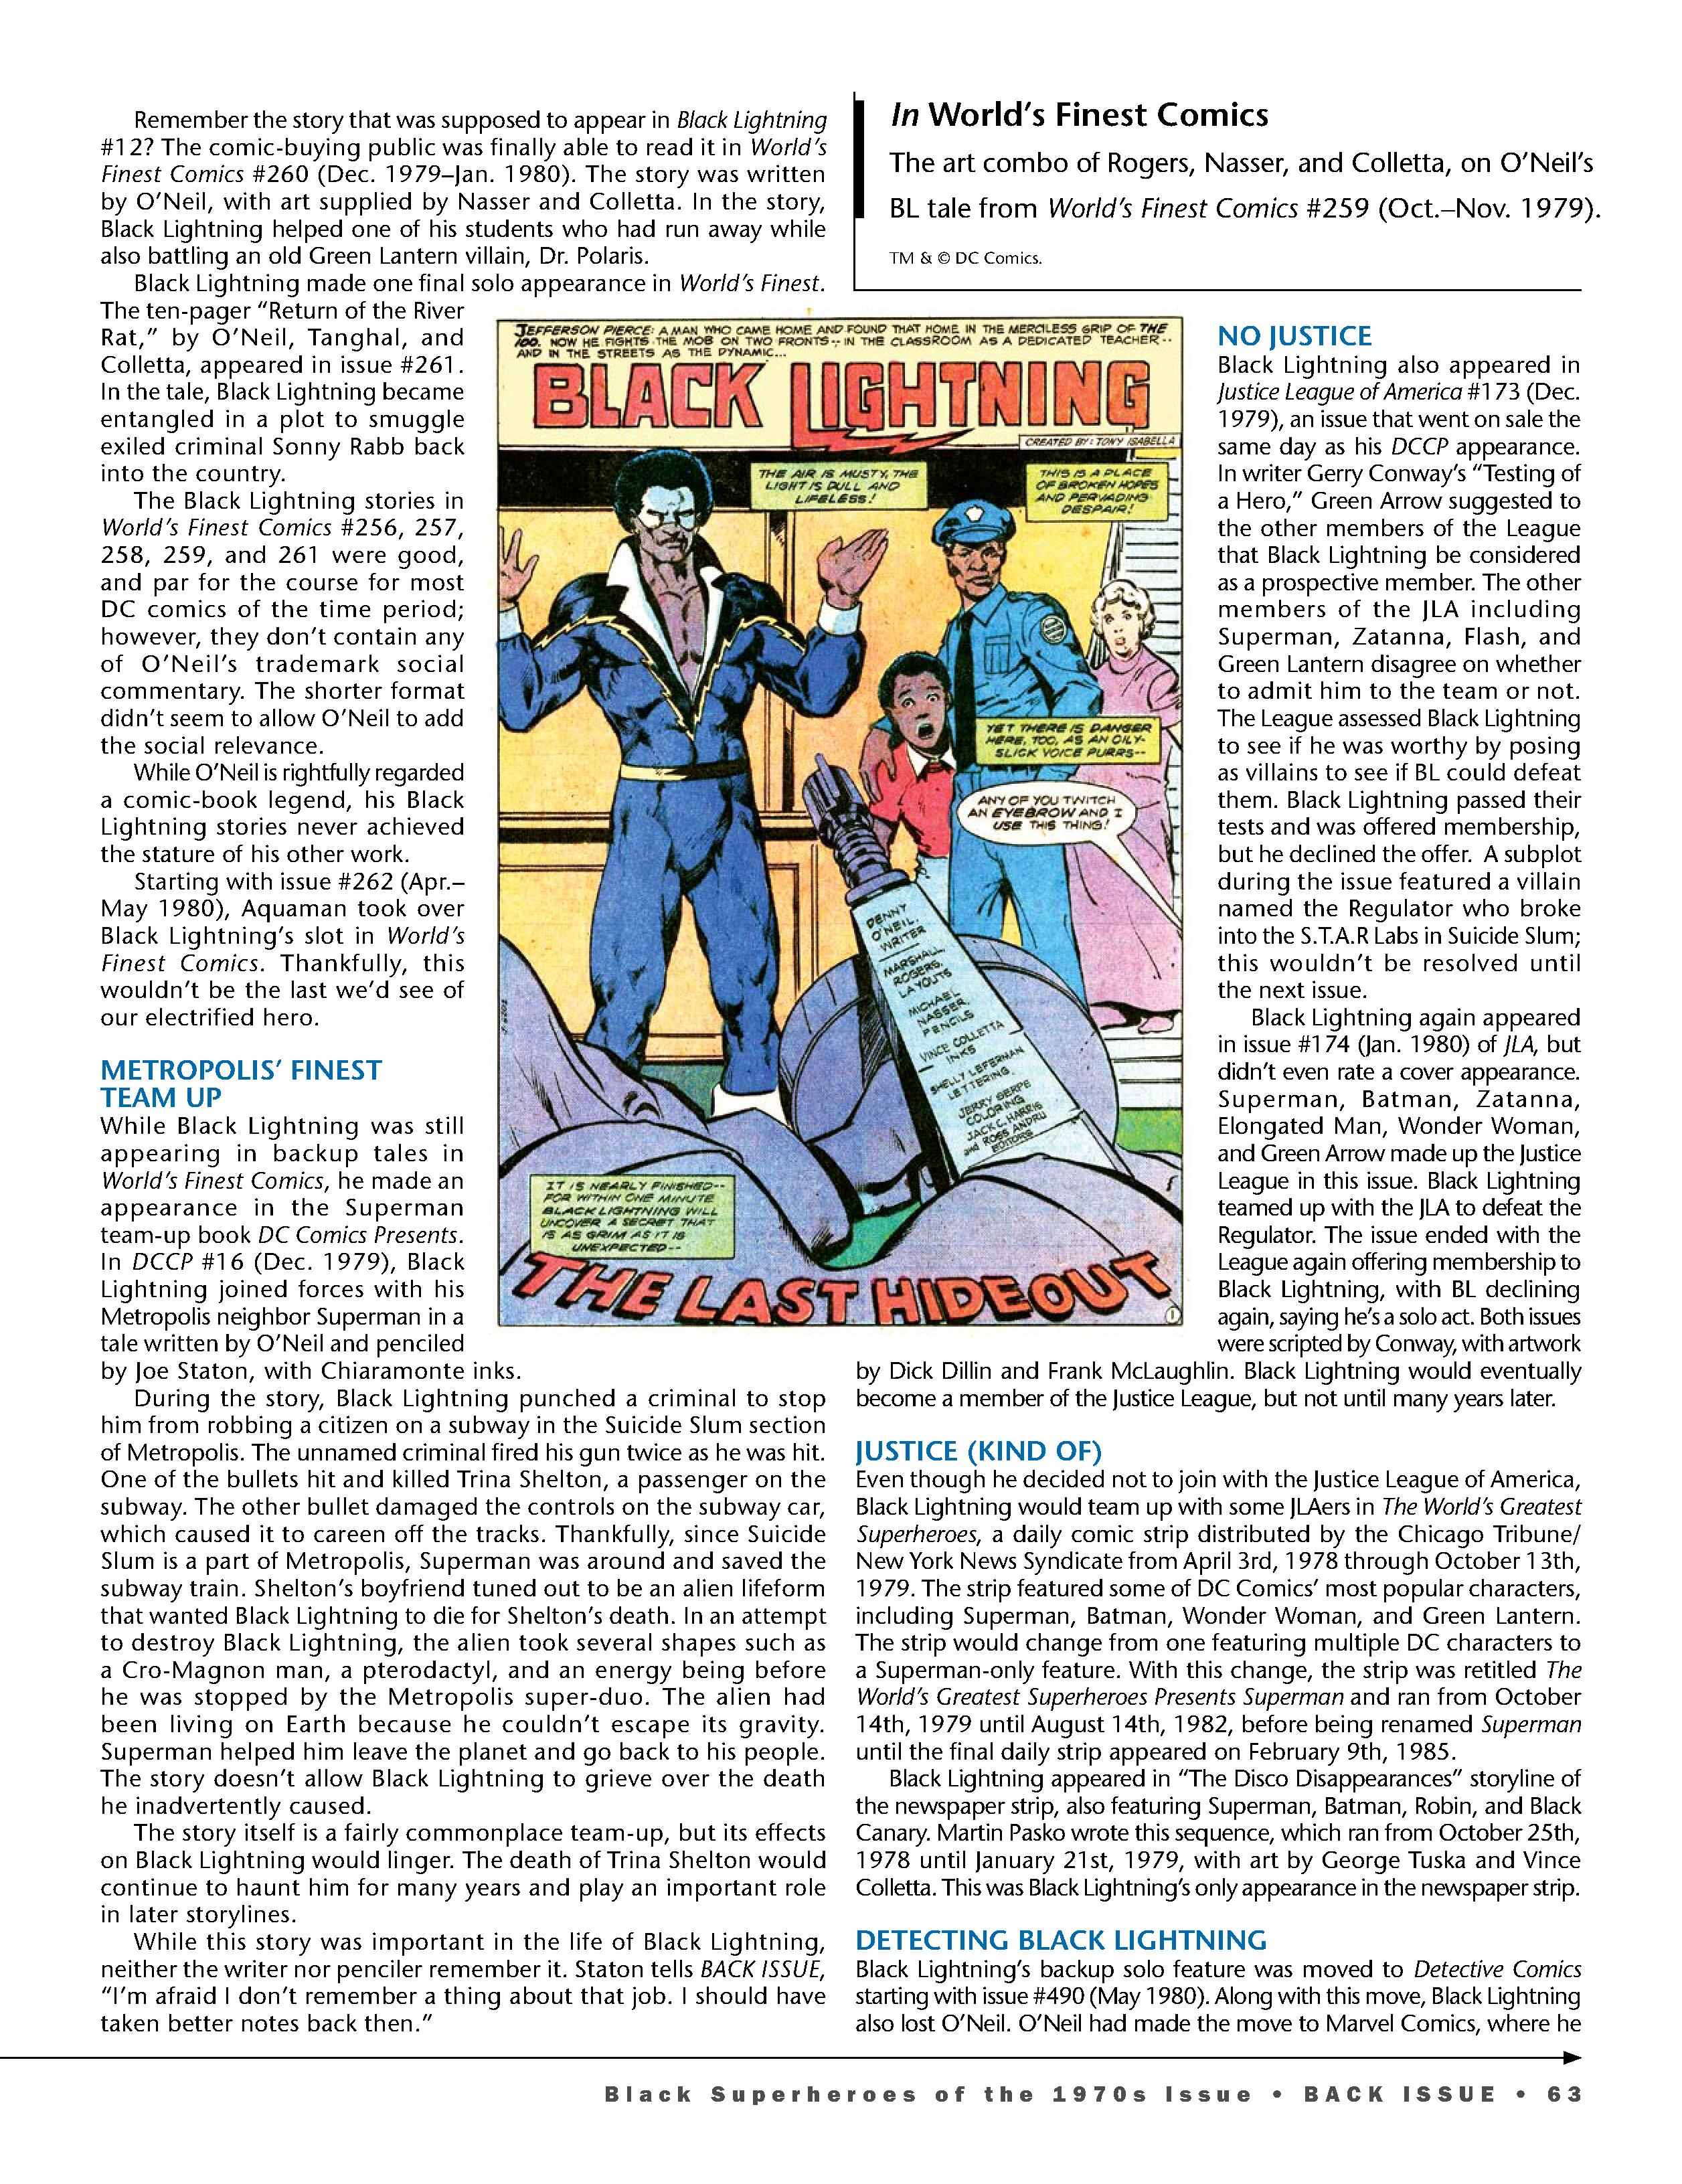 Read online Back Issue comic -  Issue #114 - 65